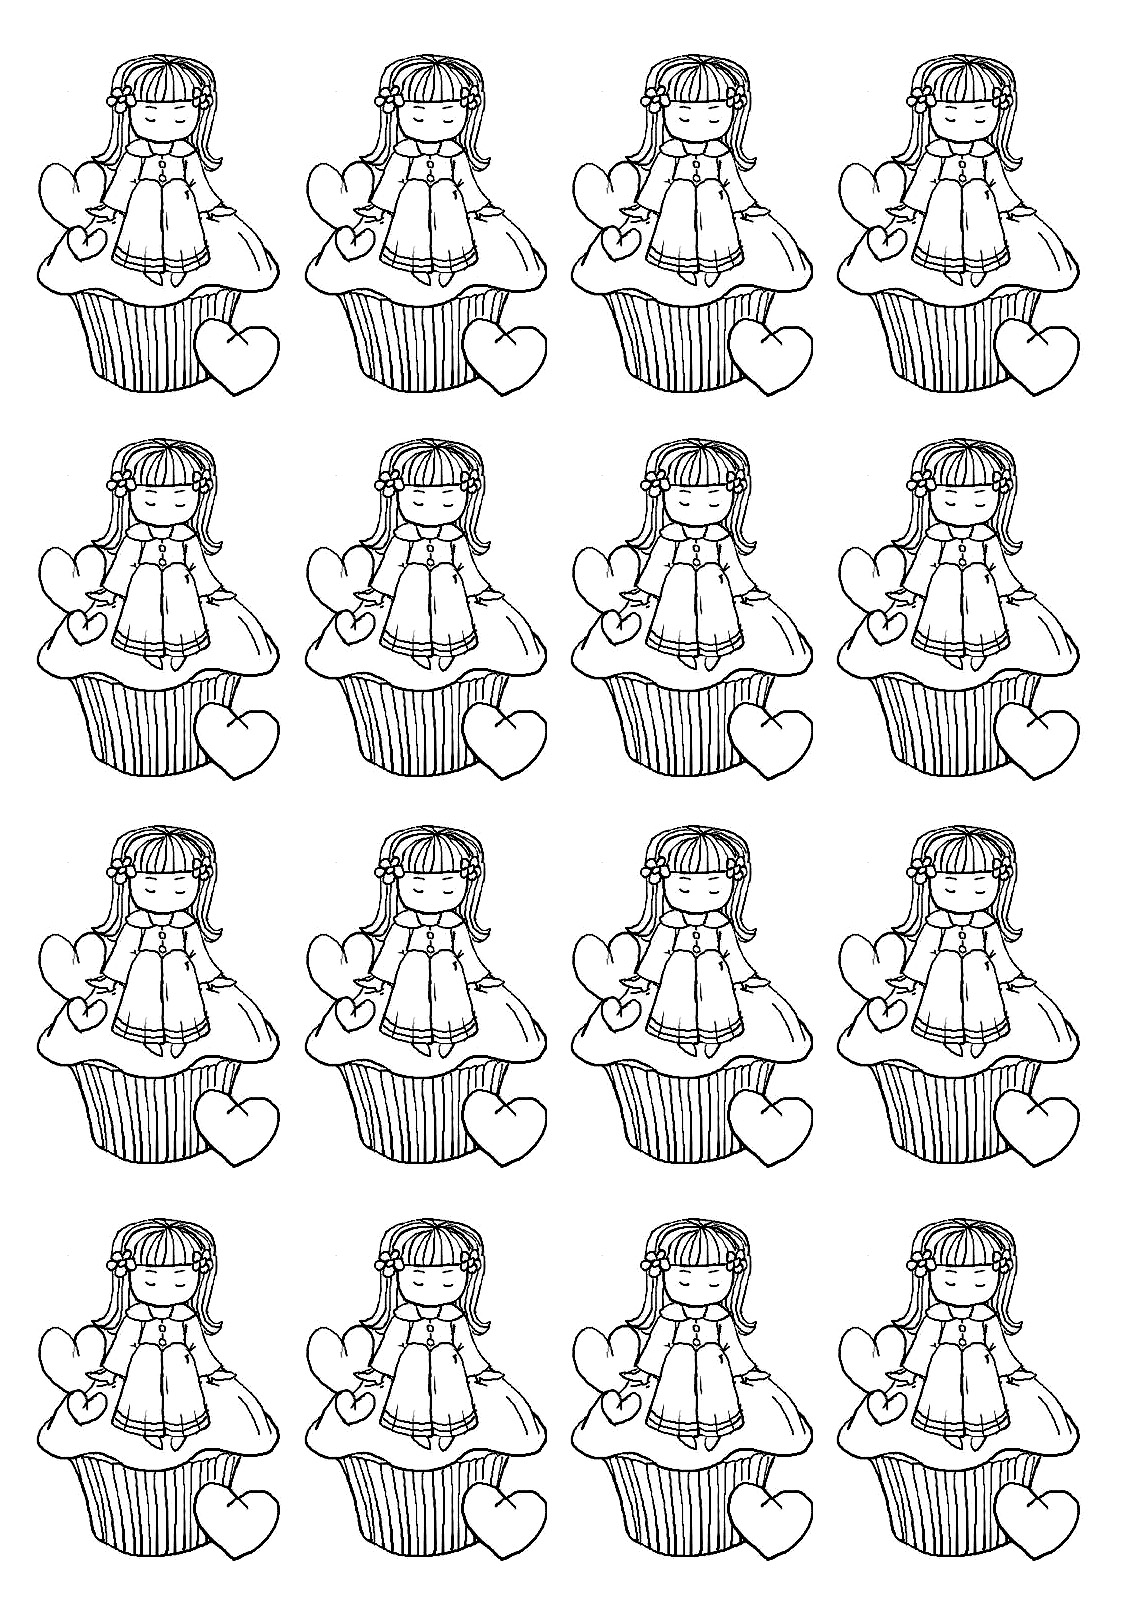 Cup cakes 50021